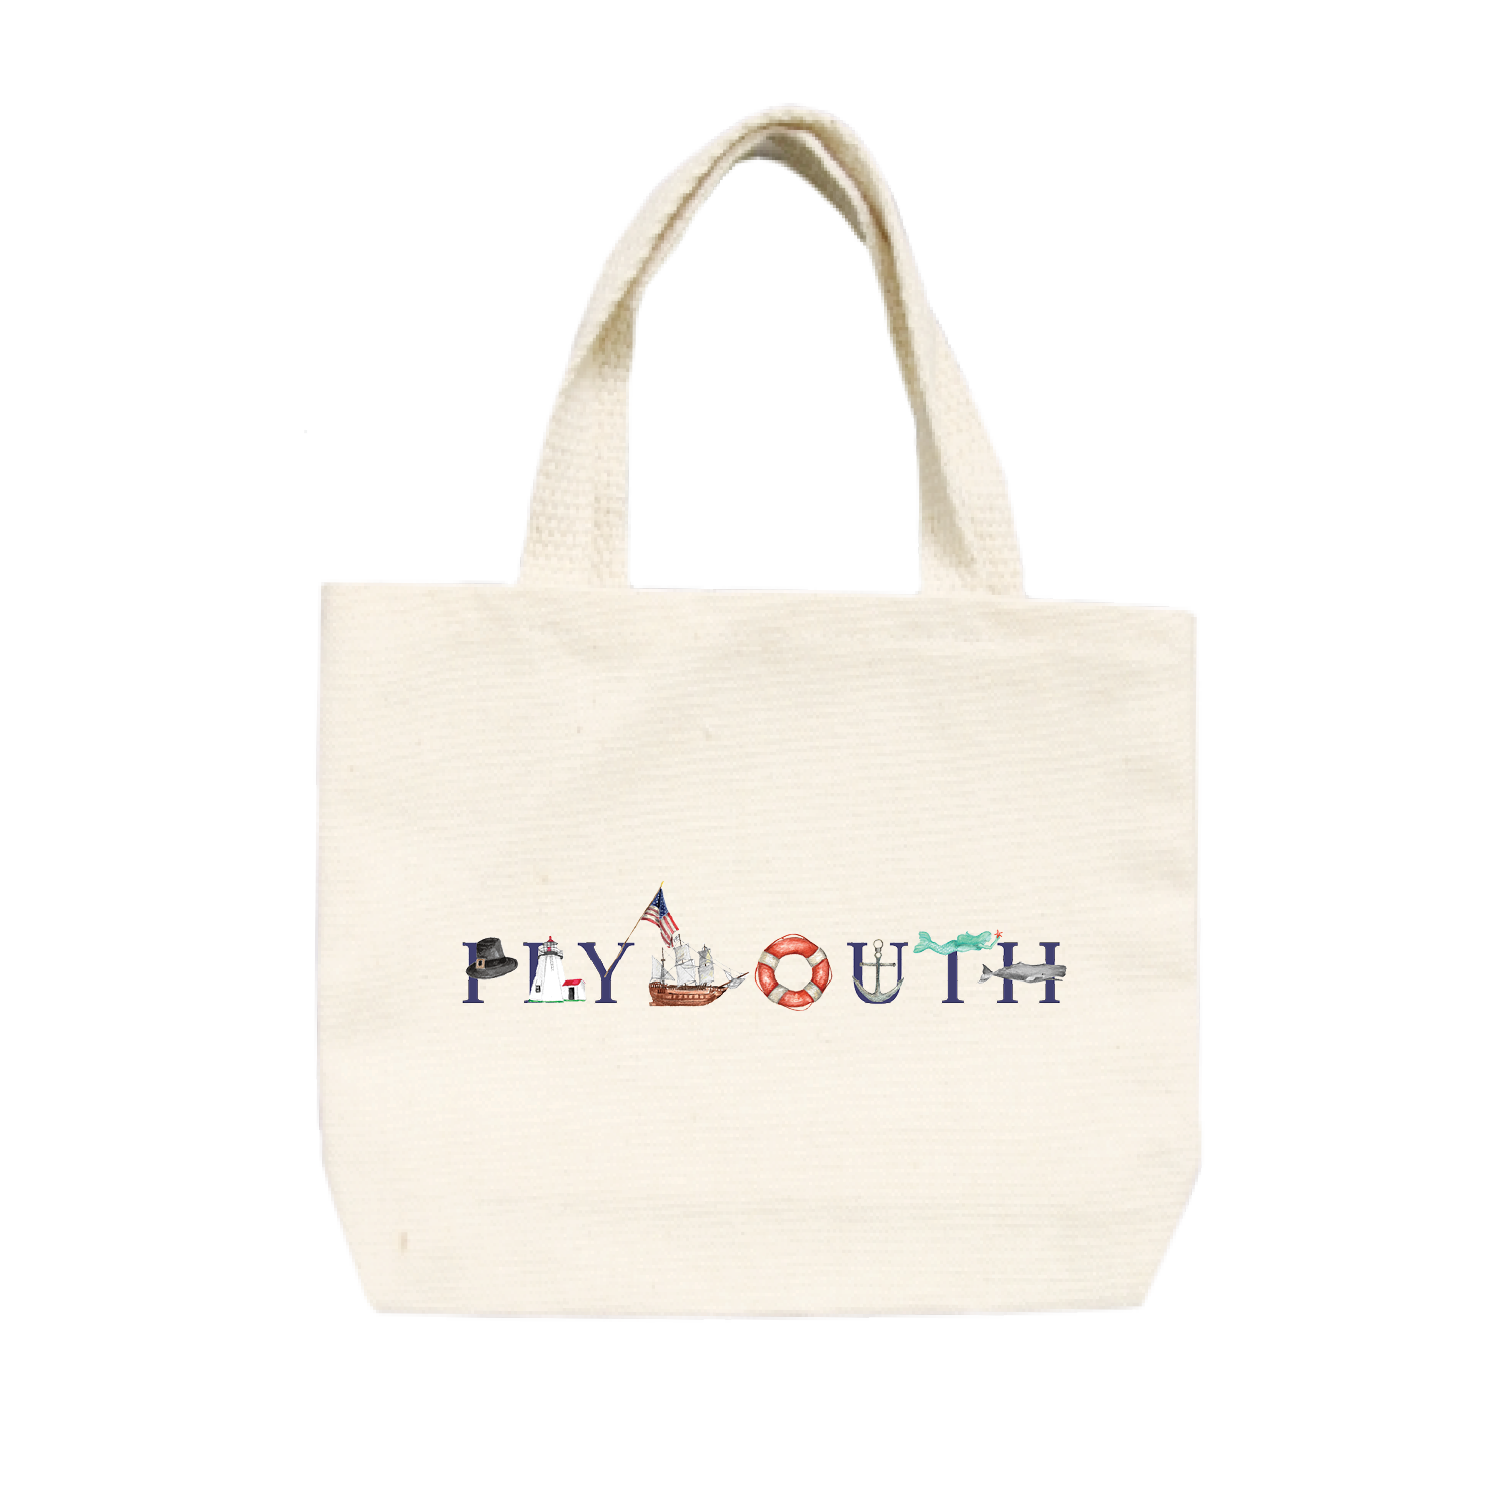 Plymouth small tote